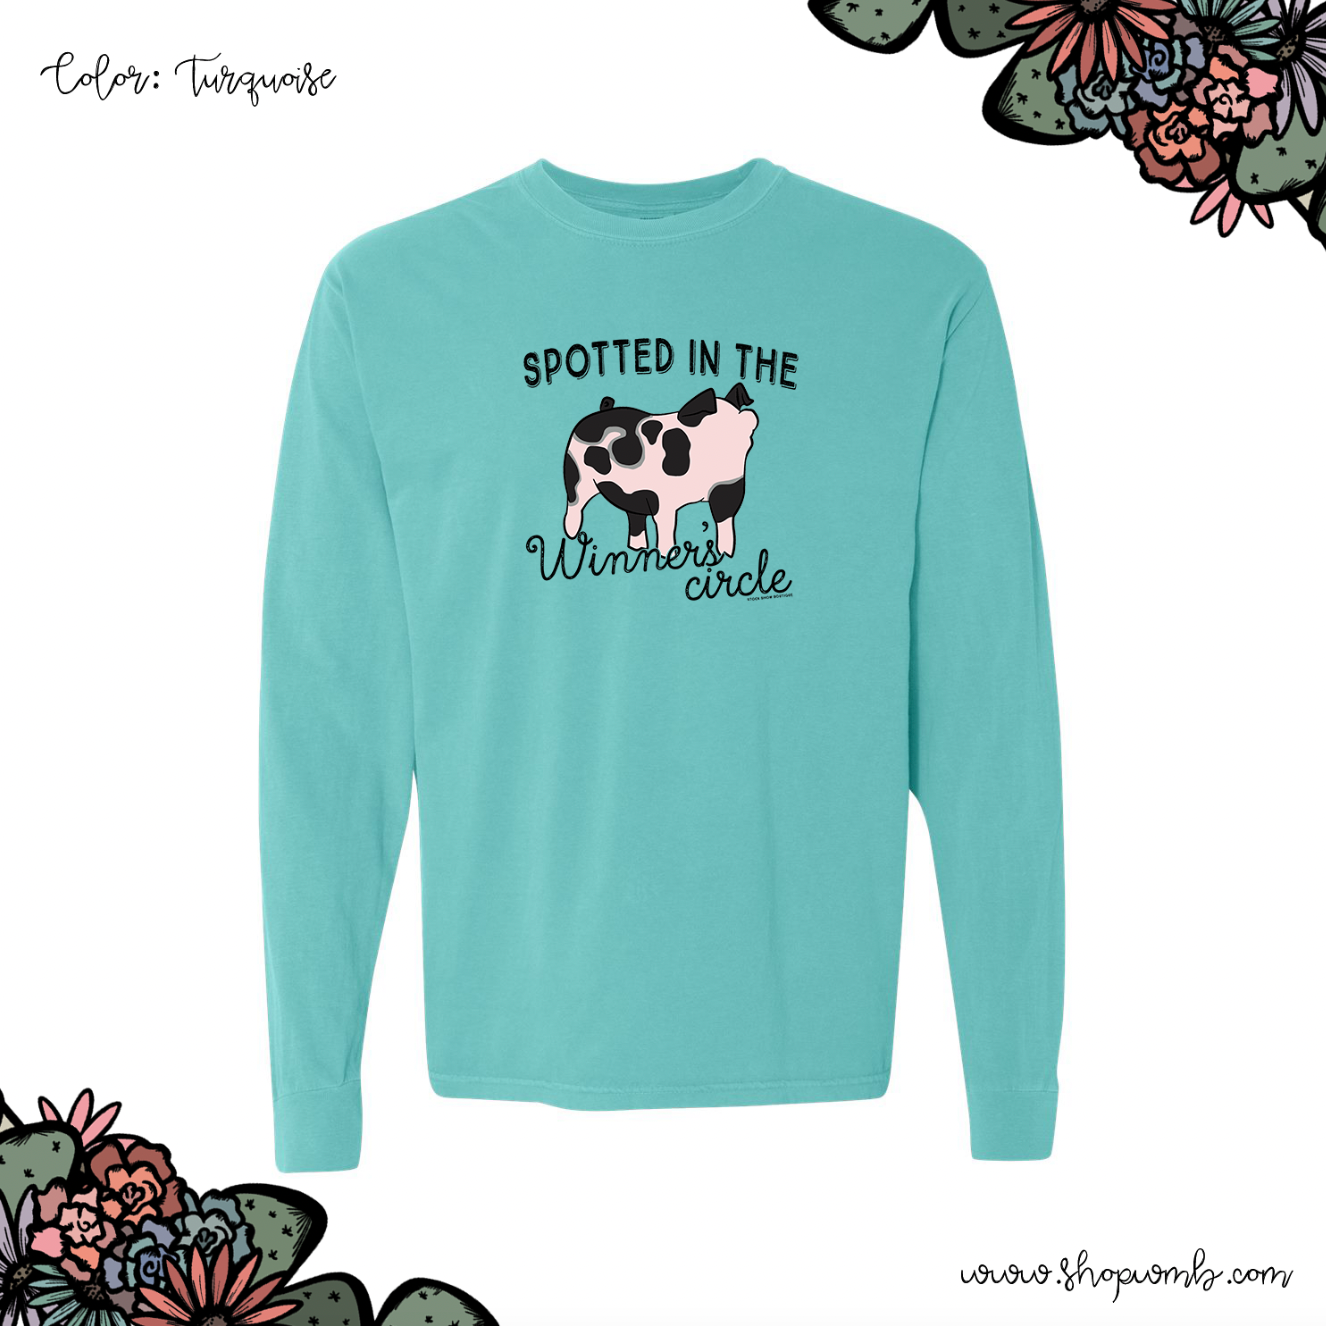 Spotted In The Winners Circle LONG SLEEVE T-Shirt (S-3XL) - Multiple Colors!